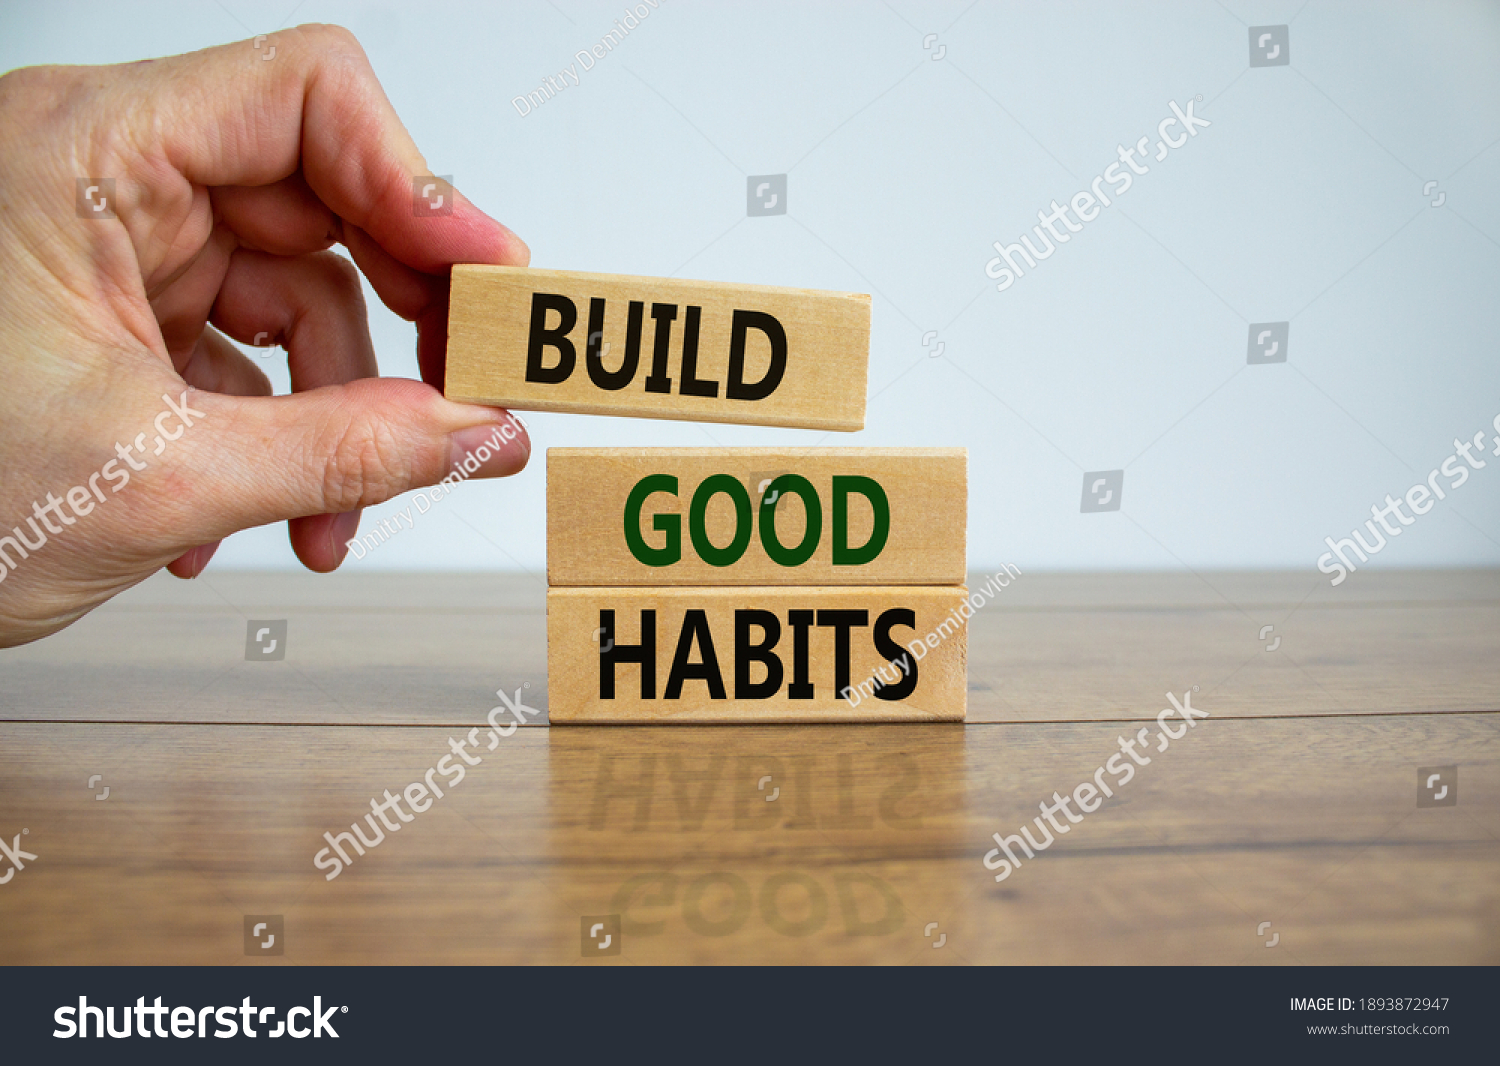 Build good habits symbol. Wooden blocks with words 'build good habits'. Male hand. Beautiful wooden table, white background, copy space. Business, psychological and build good habits concept. #1893872947